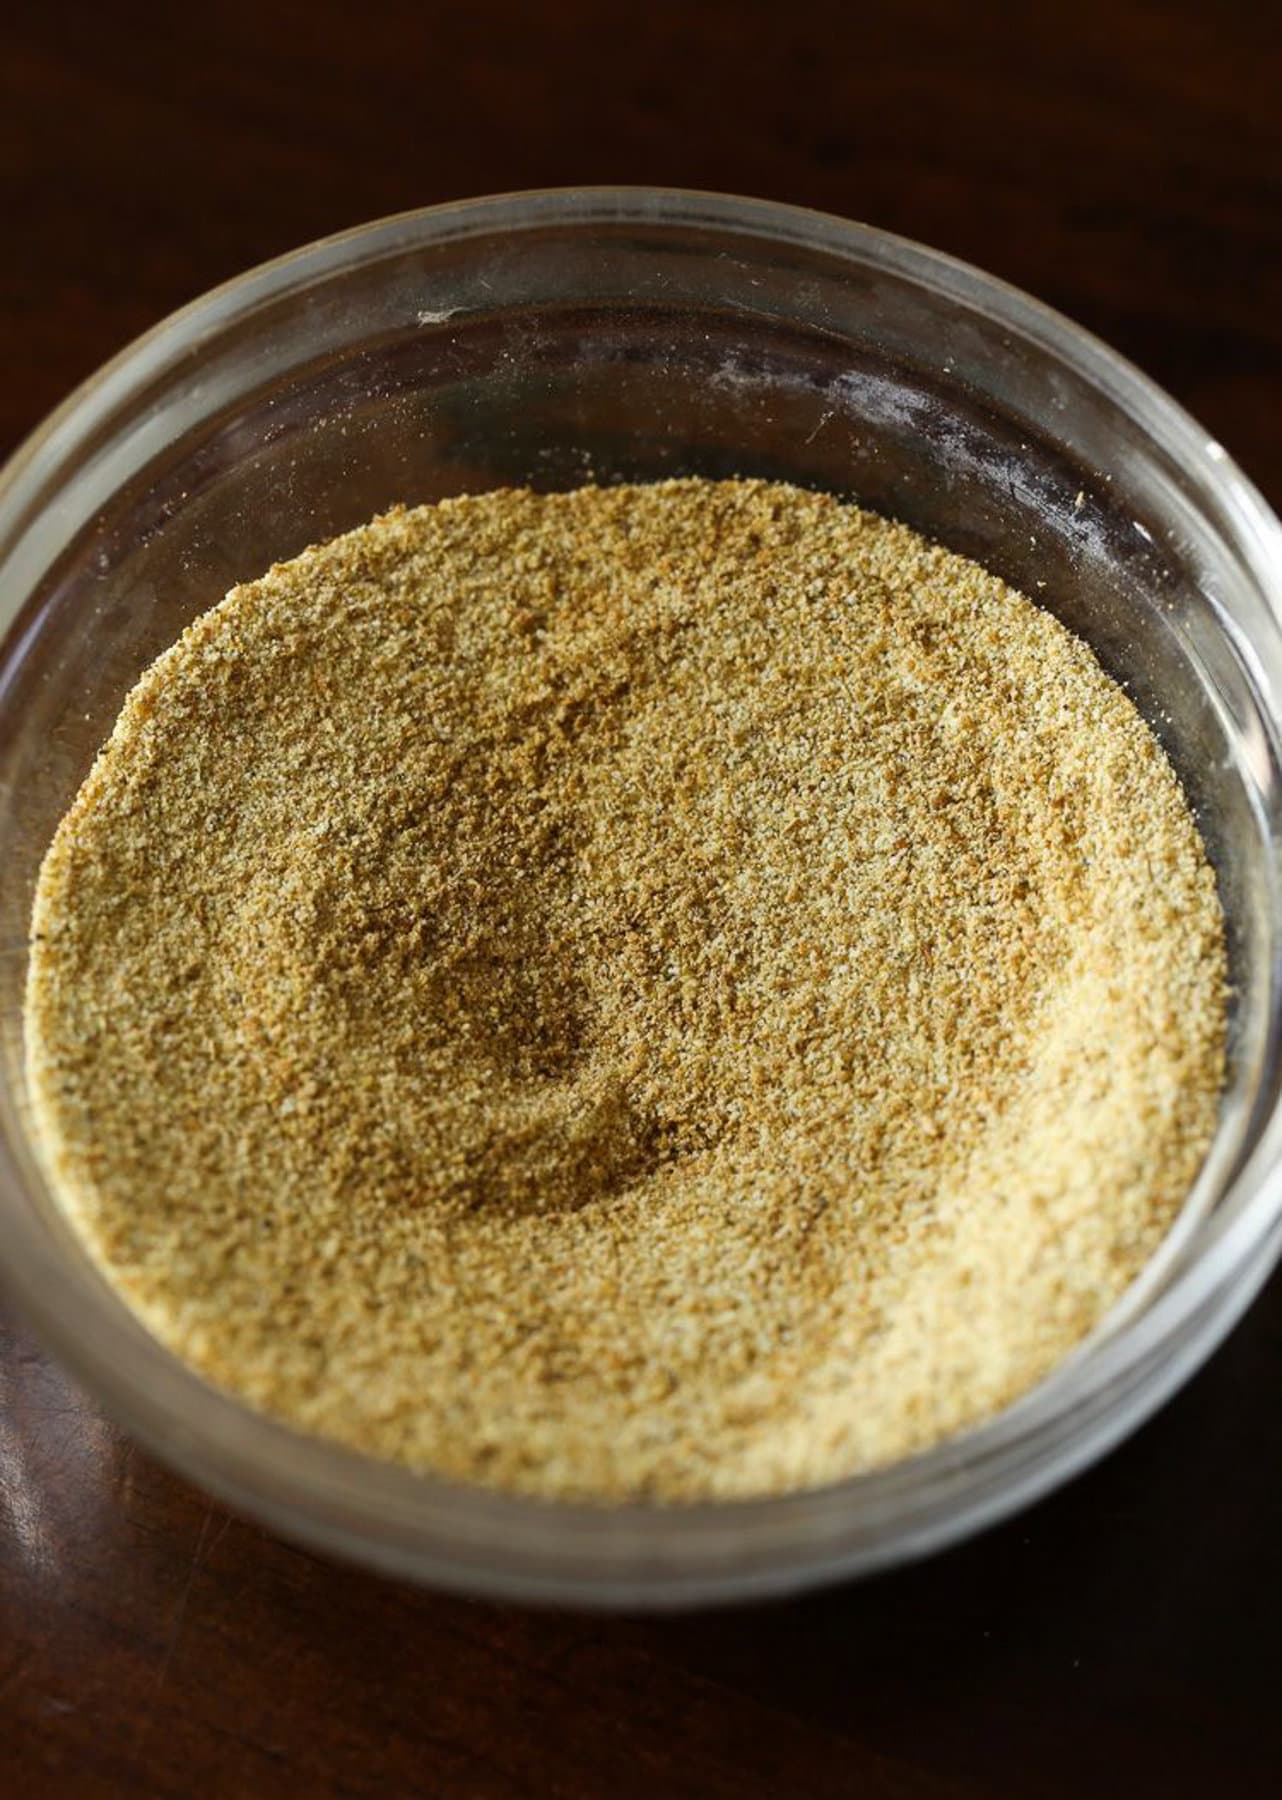 The dry rub for Cuban pork in a glass dish.